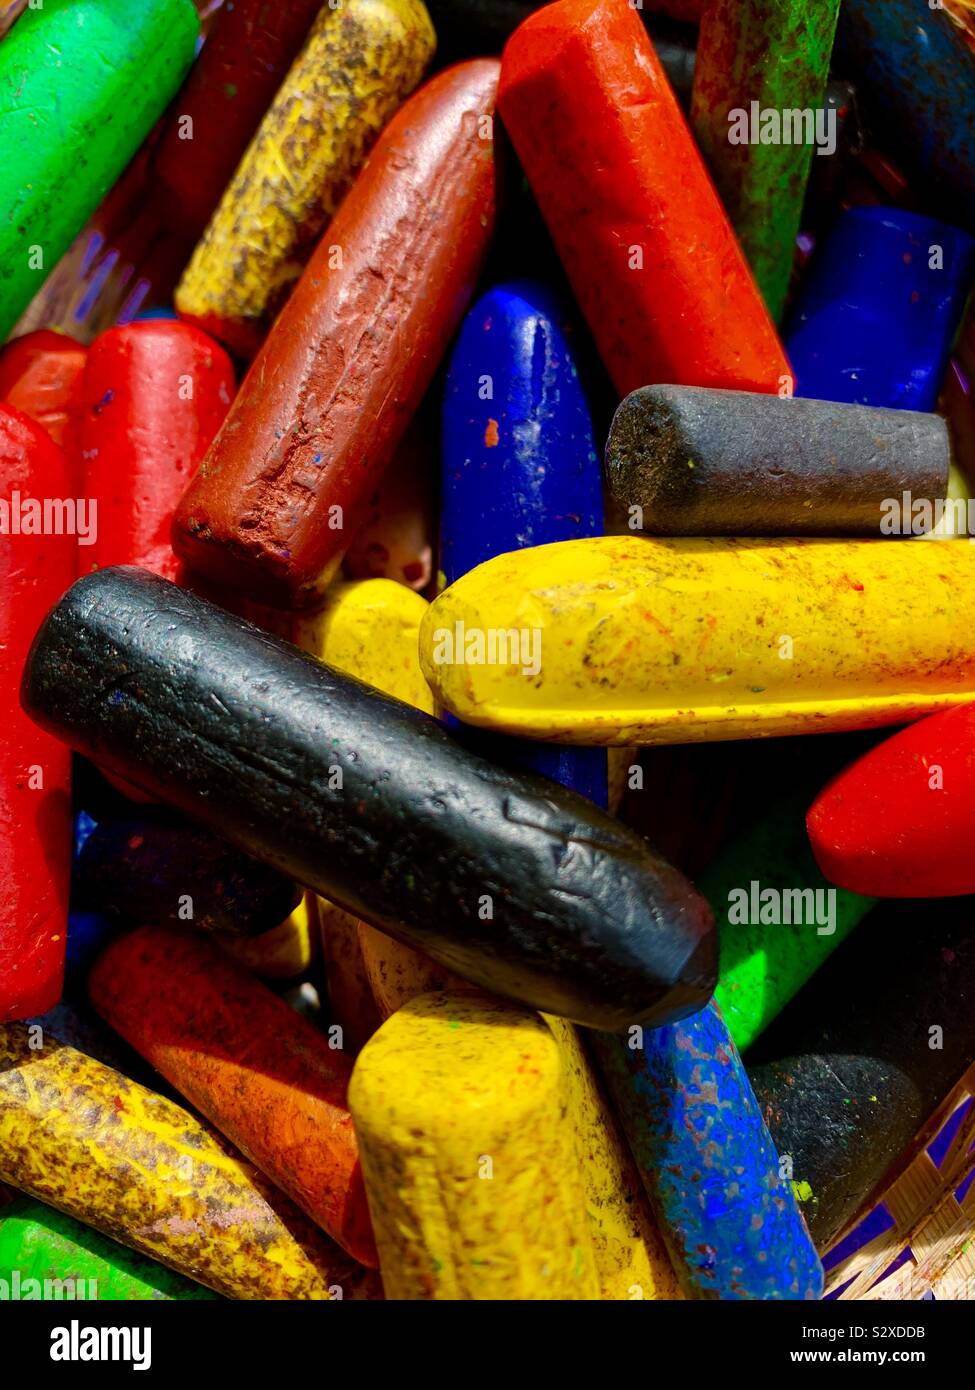 box of old crayons Stock Photo - Alamy